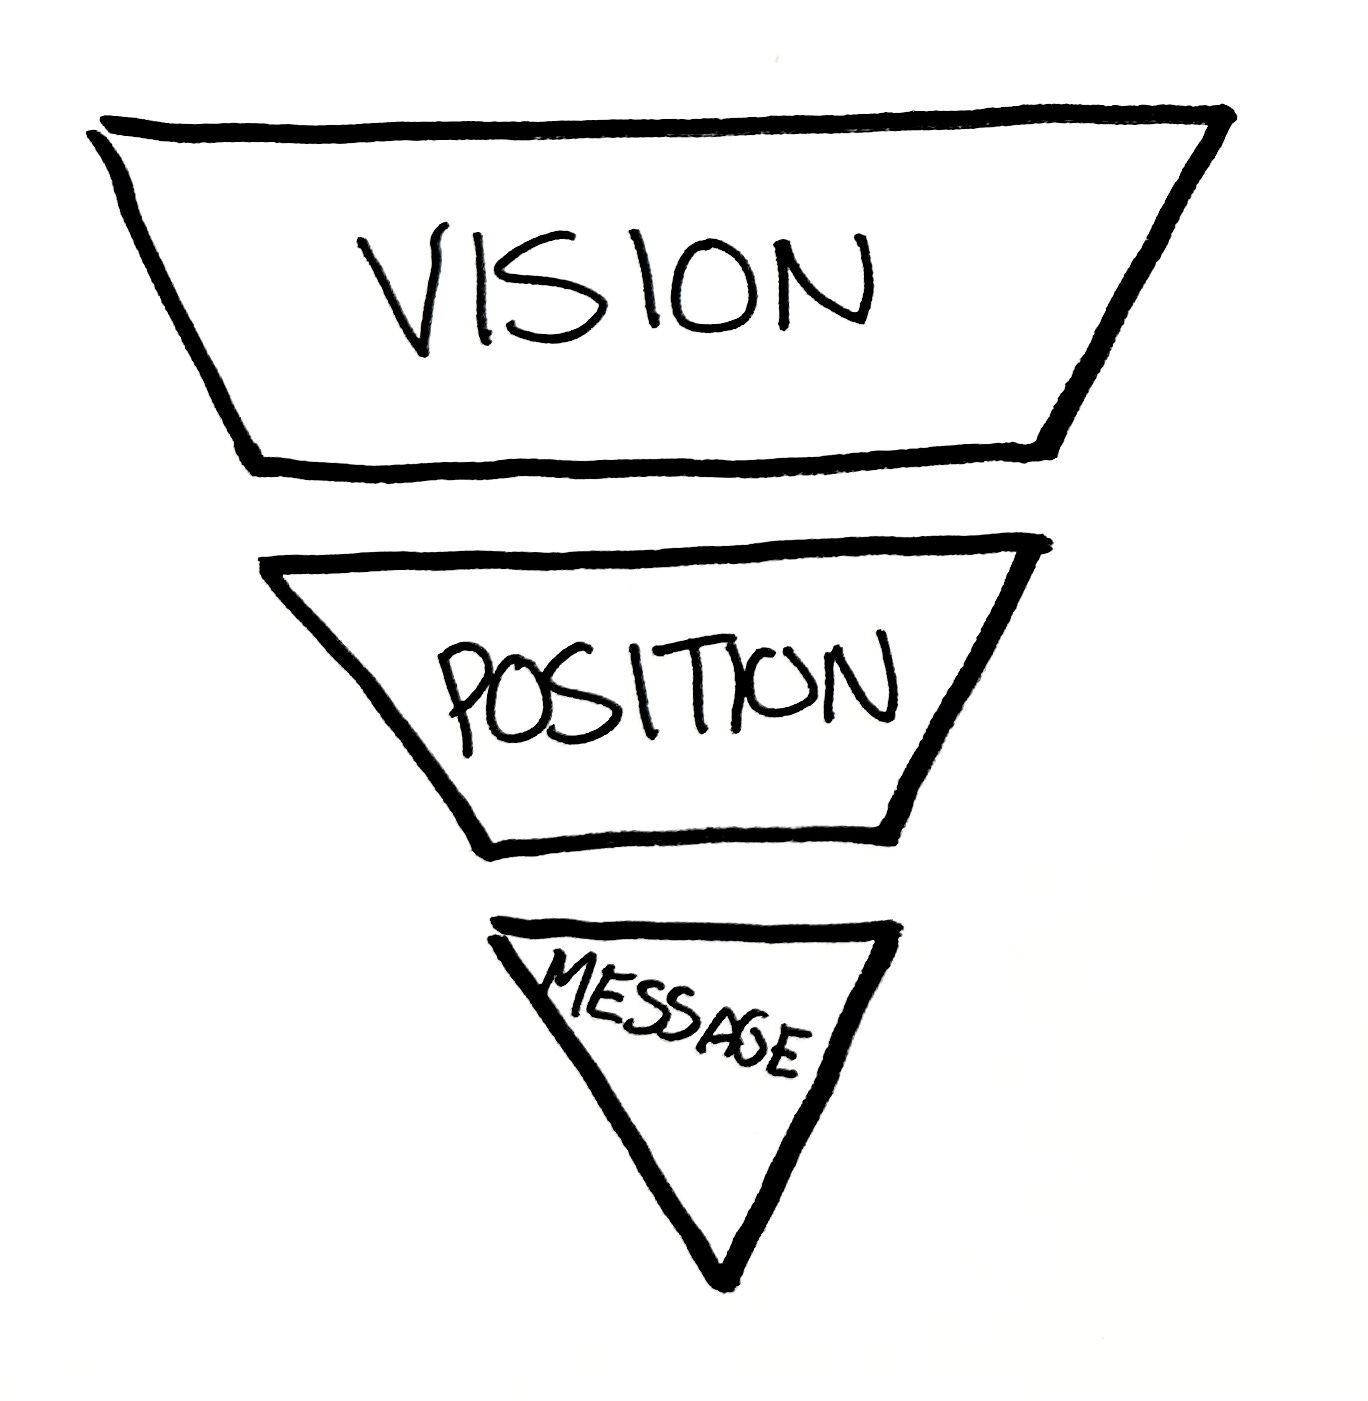 a hand drawn graphic of an upside down pyramid divided into 3 sections. The wide top part says Vision, the middle part says Position, and the pointed bottom part says Message.